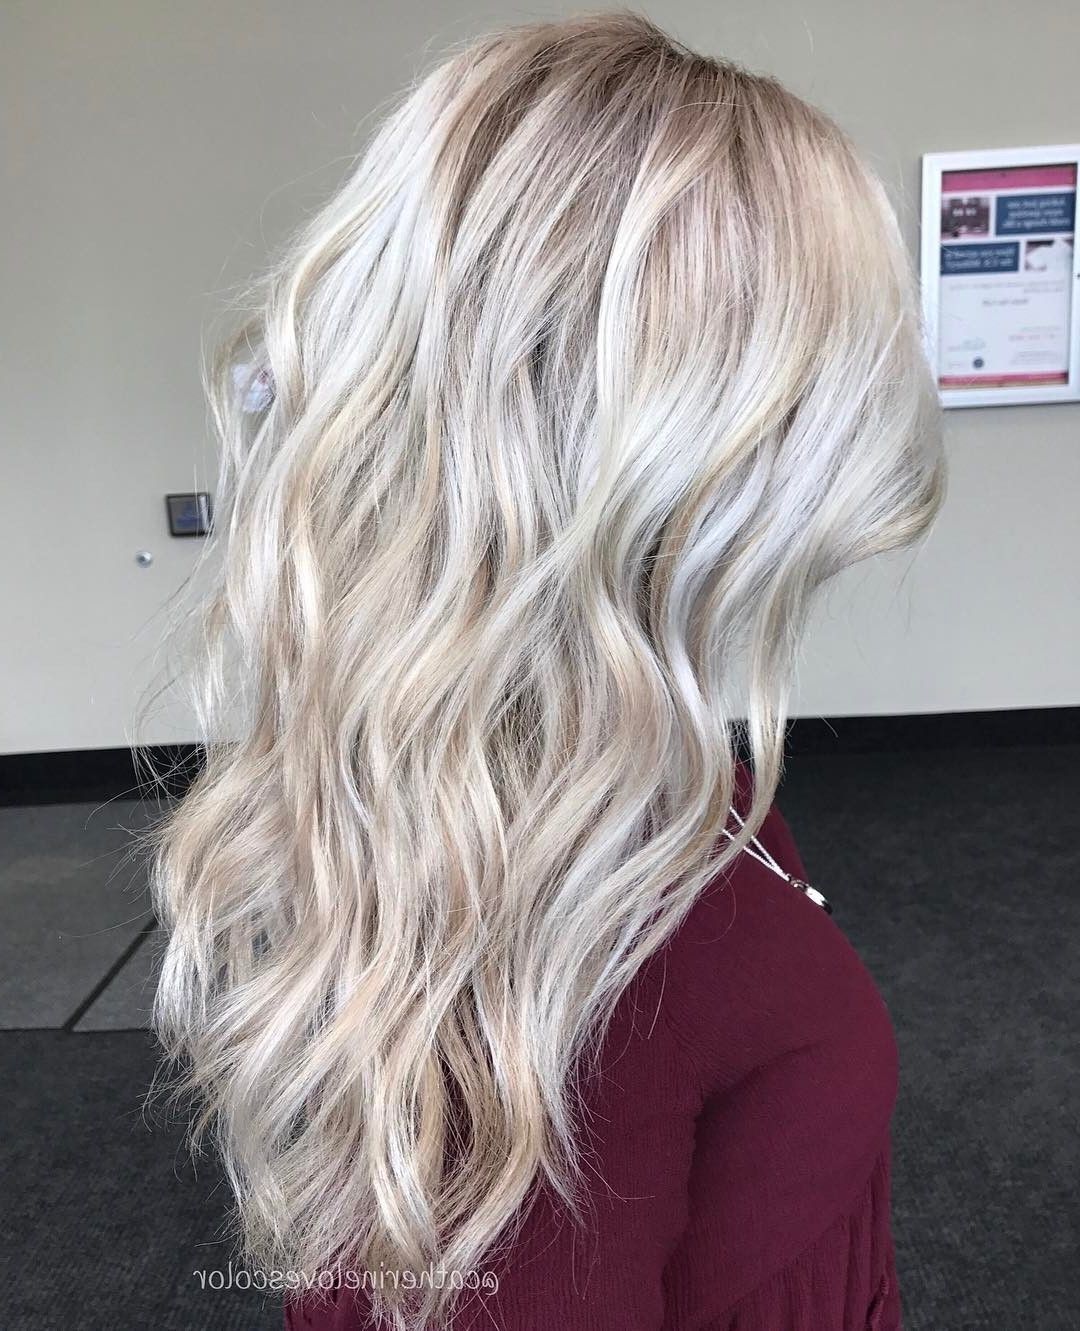 20 Adorable Ash Blonde Hairstyles To Try: Hair Color Ideas 2018 With Regard To 2018 Light Ash Locks Blonde Hairstyles (View 2 of 20)